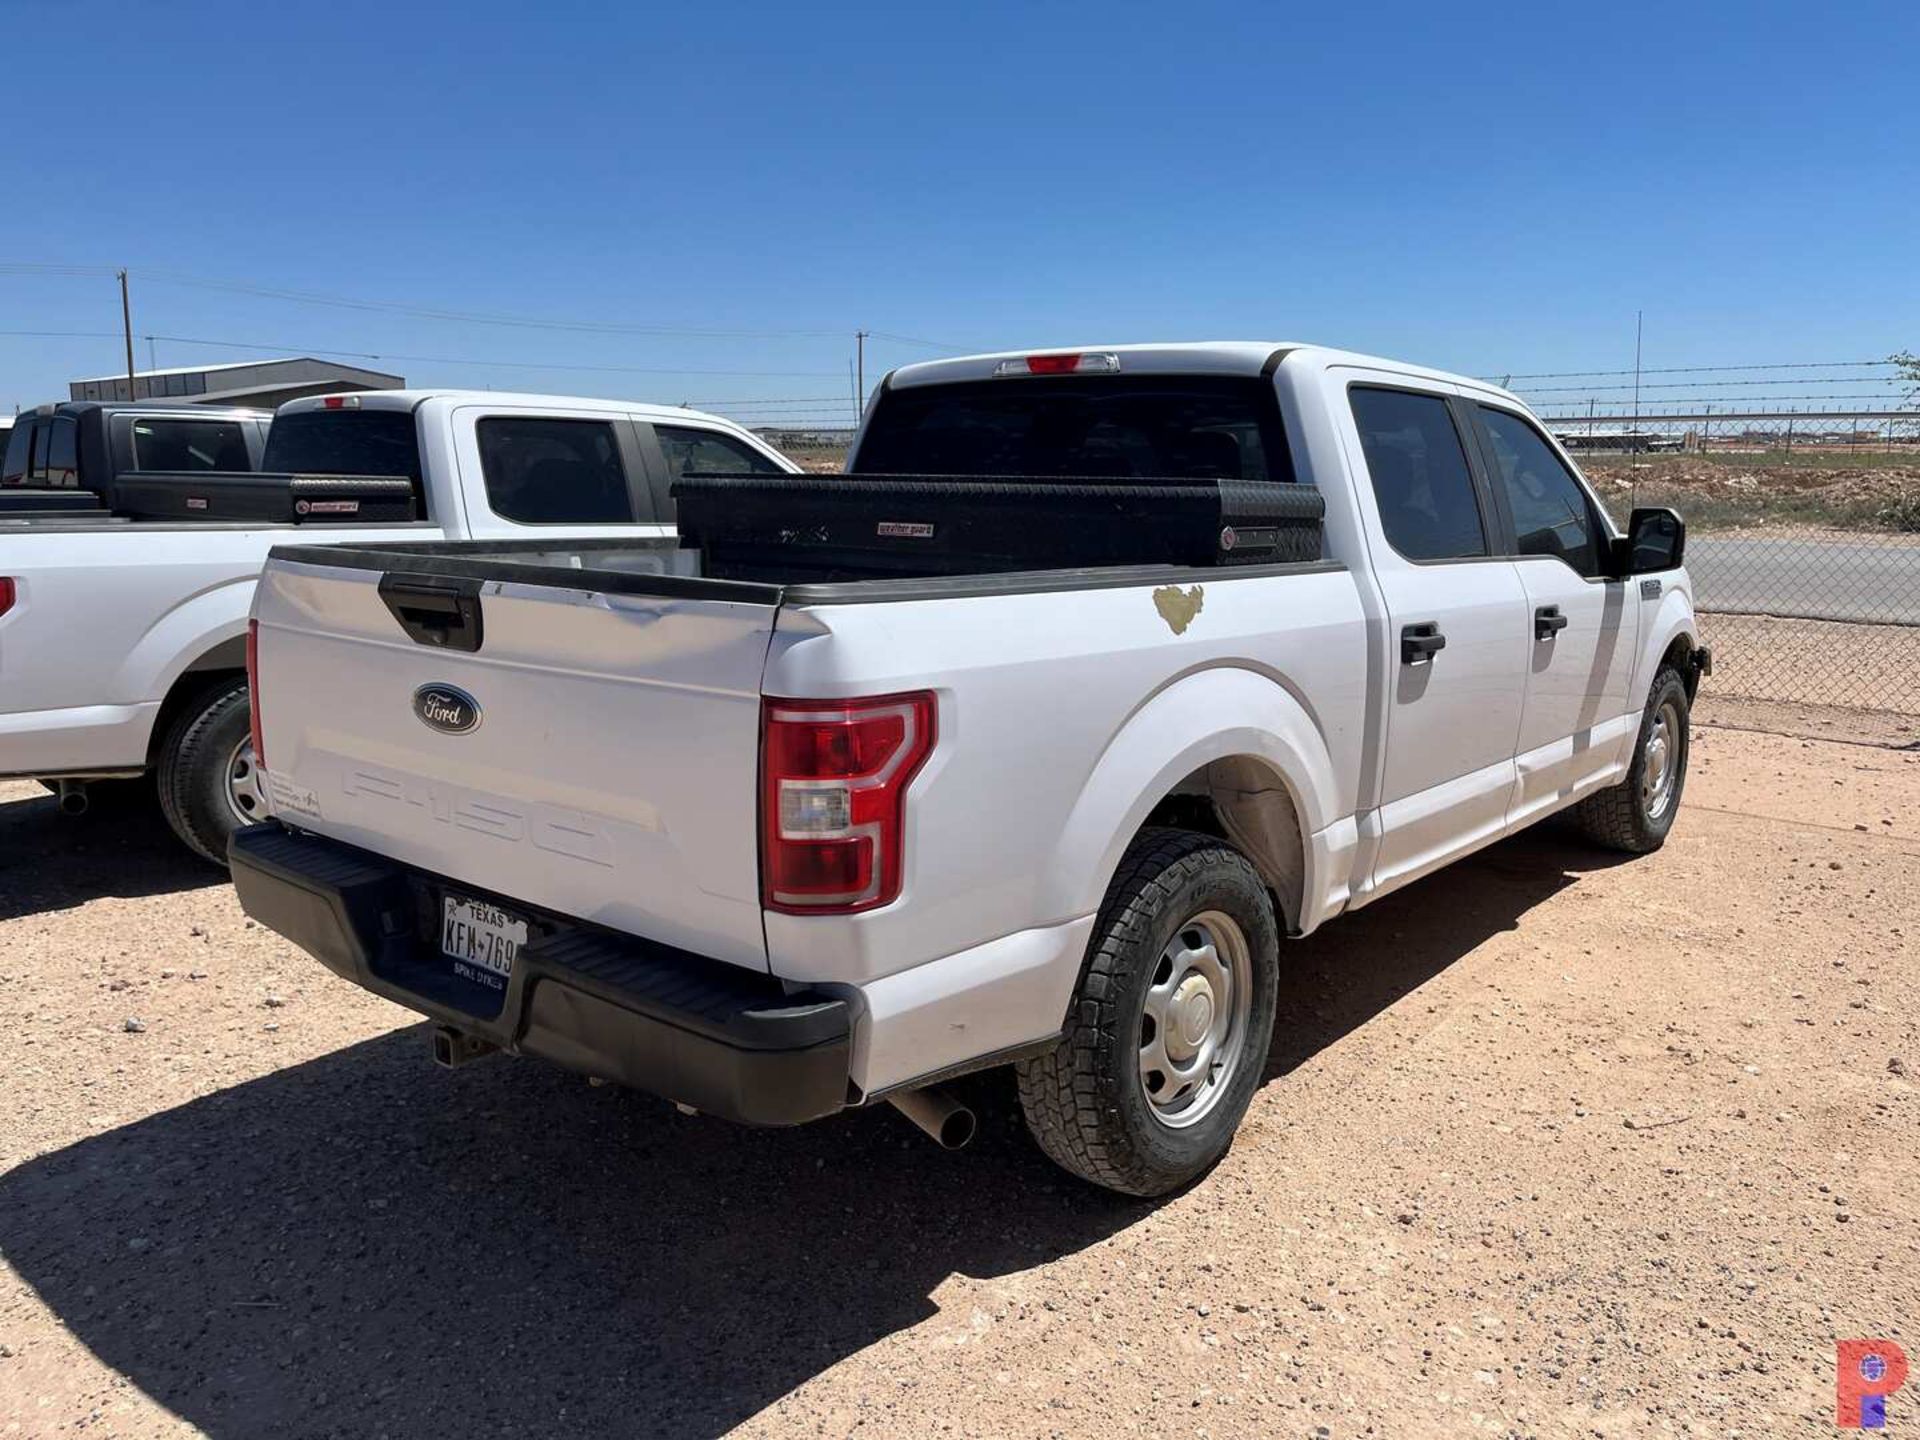 2018 FORD F-150 CREW CAB PICKUP TRUCK - Image 3 of 7